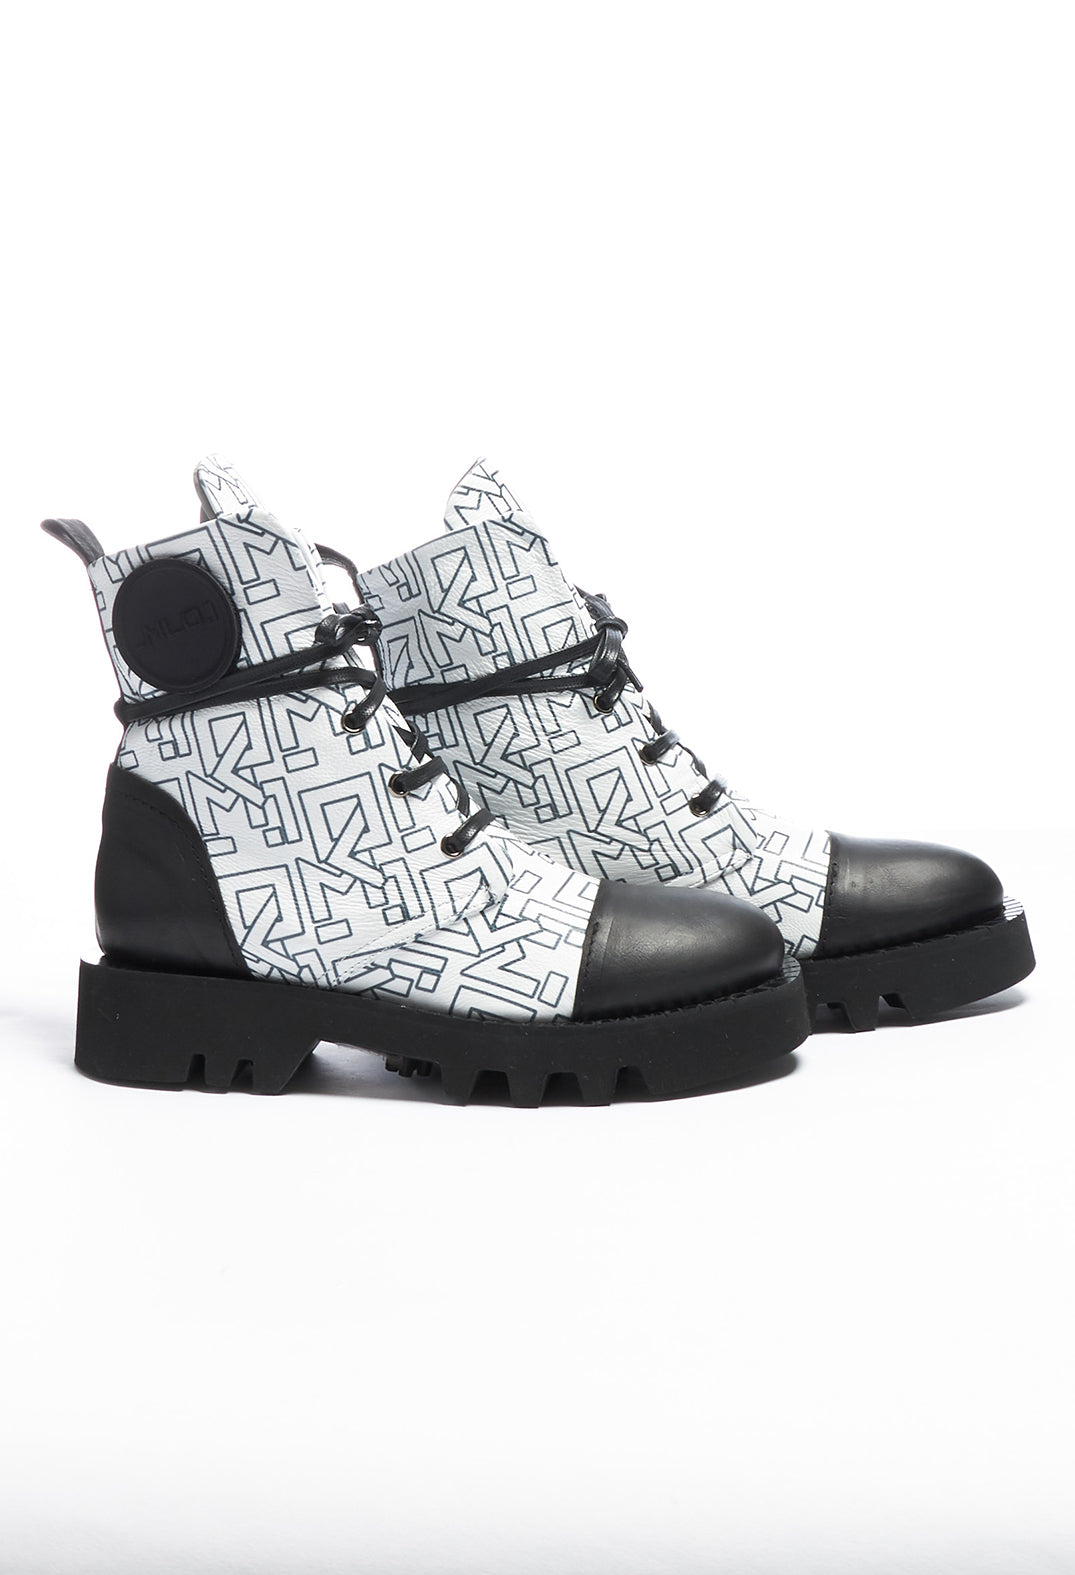 Leather Motif Ankle Boots in Slodi Black / Los Angeles White